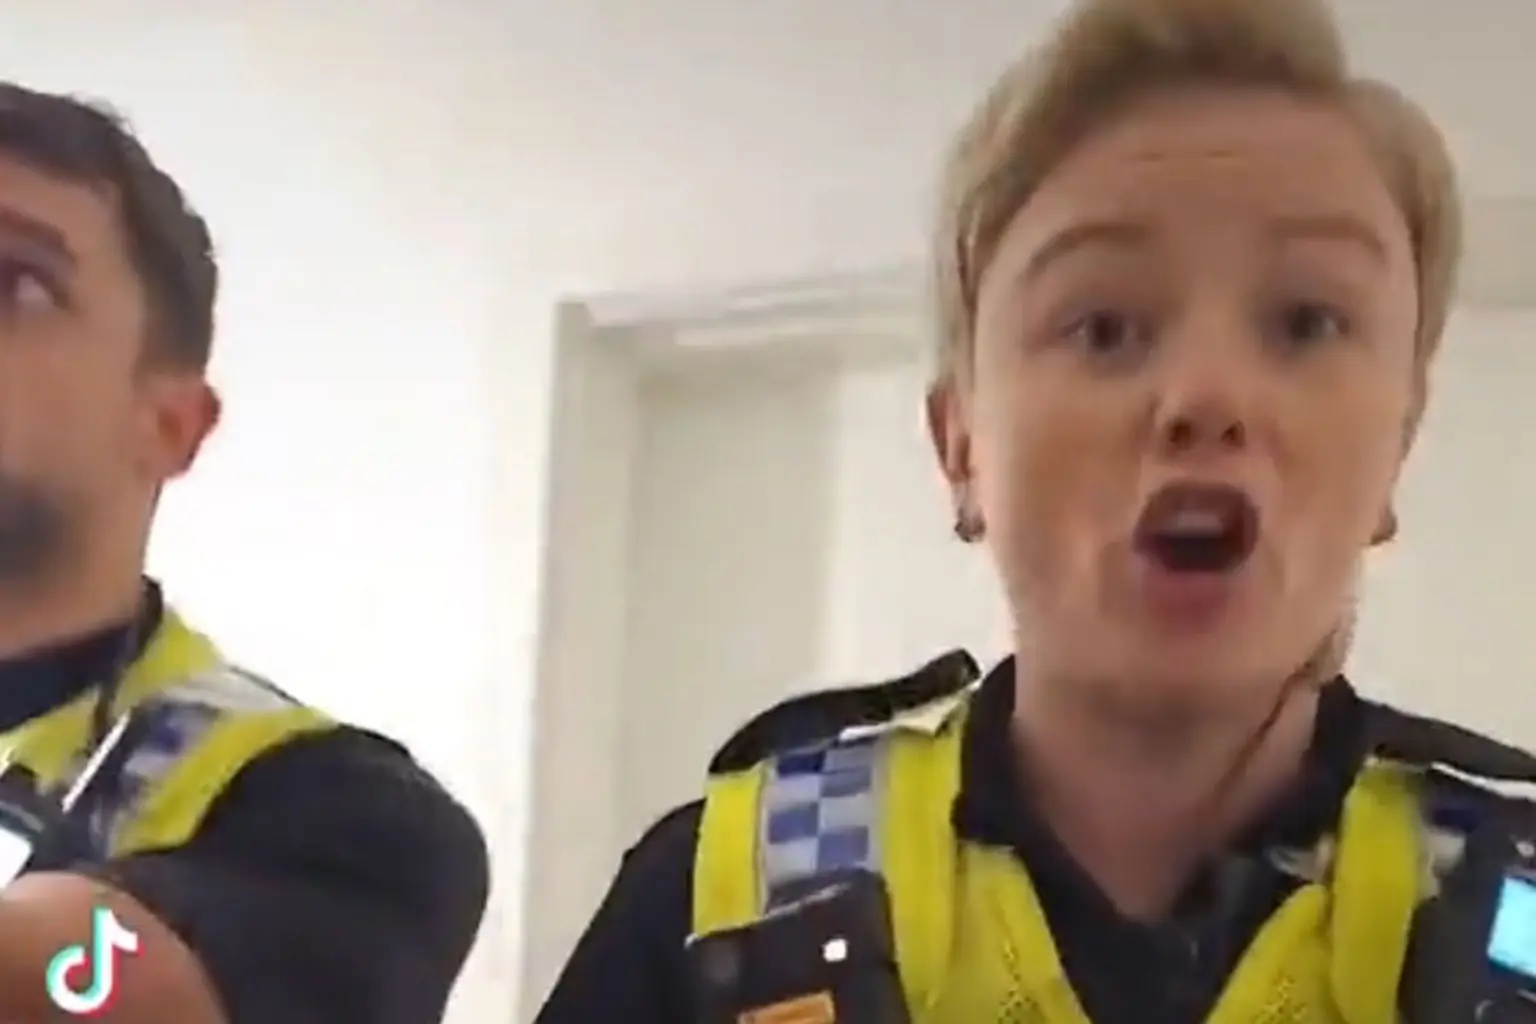 Angry Twitter reacts to the Arrest of a Autistic girl, Who called Police Officer Lesbian